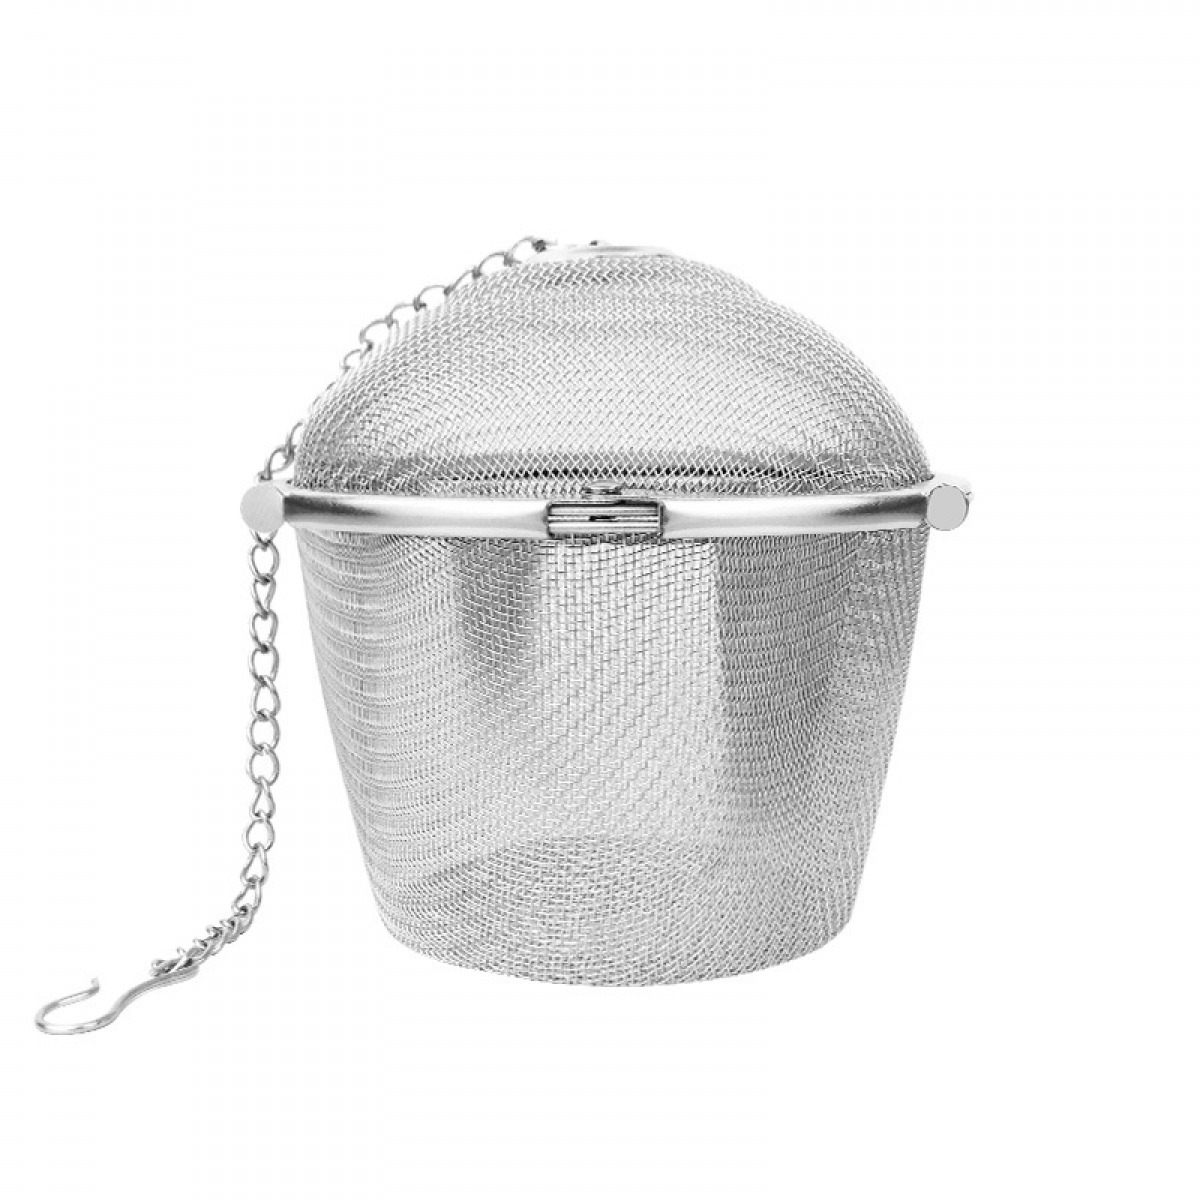 Extra Fine 18/8 Stainless Twist-Lock Spice Ball With Chain Sphere Mesh Tea Strainer Herb Spice Filter2 Pack